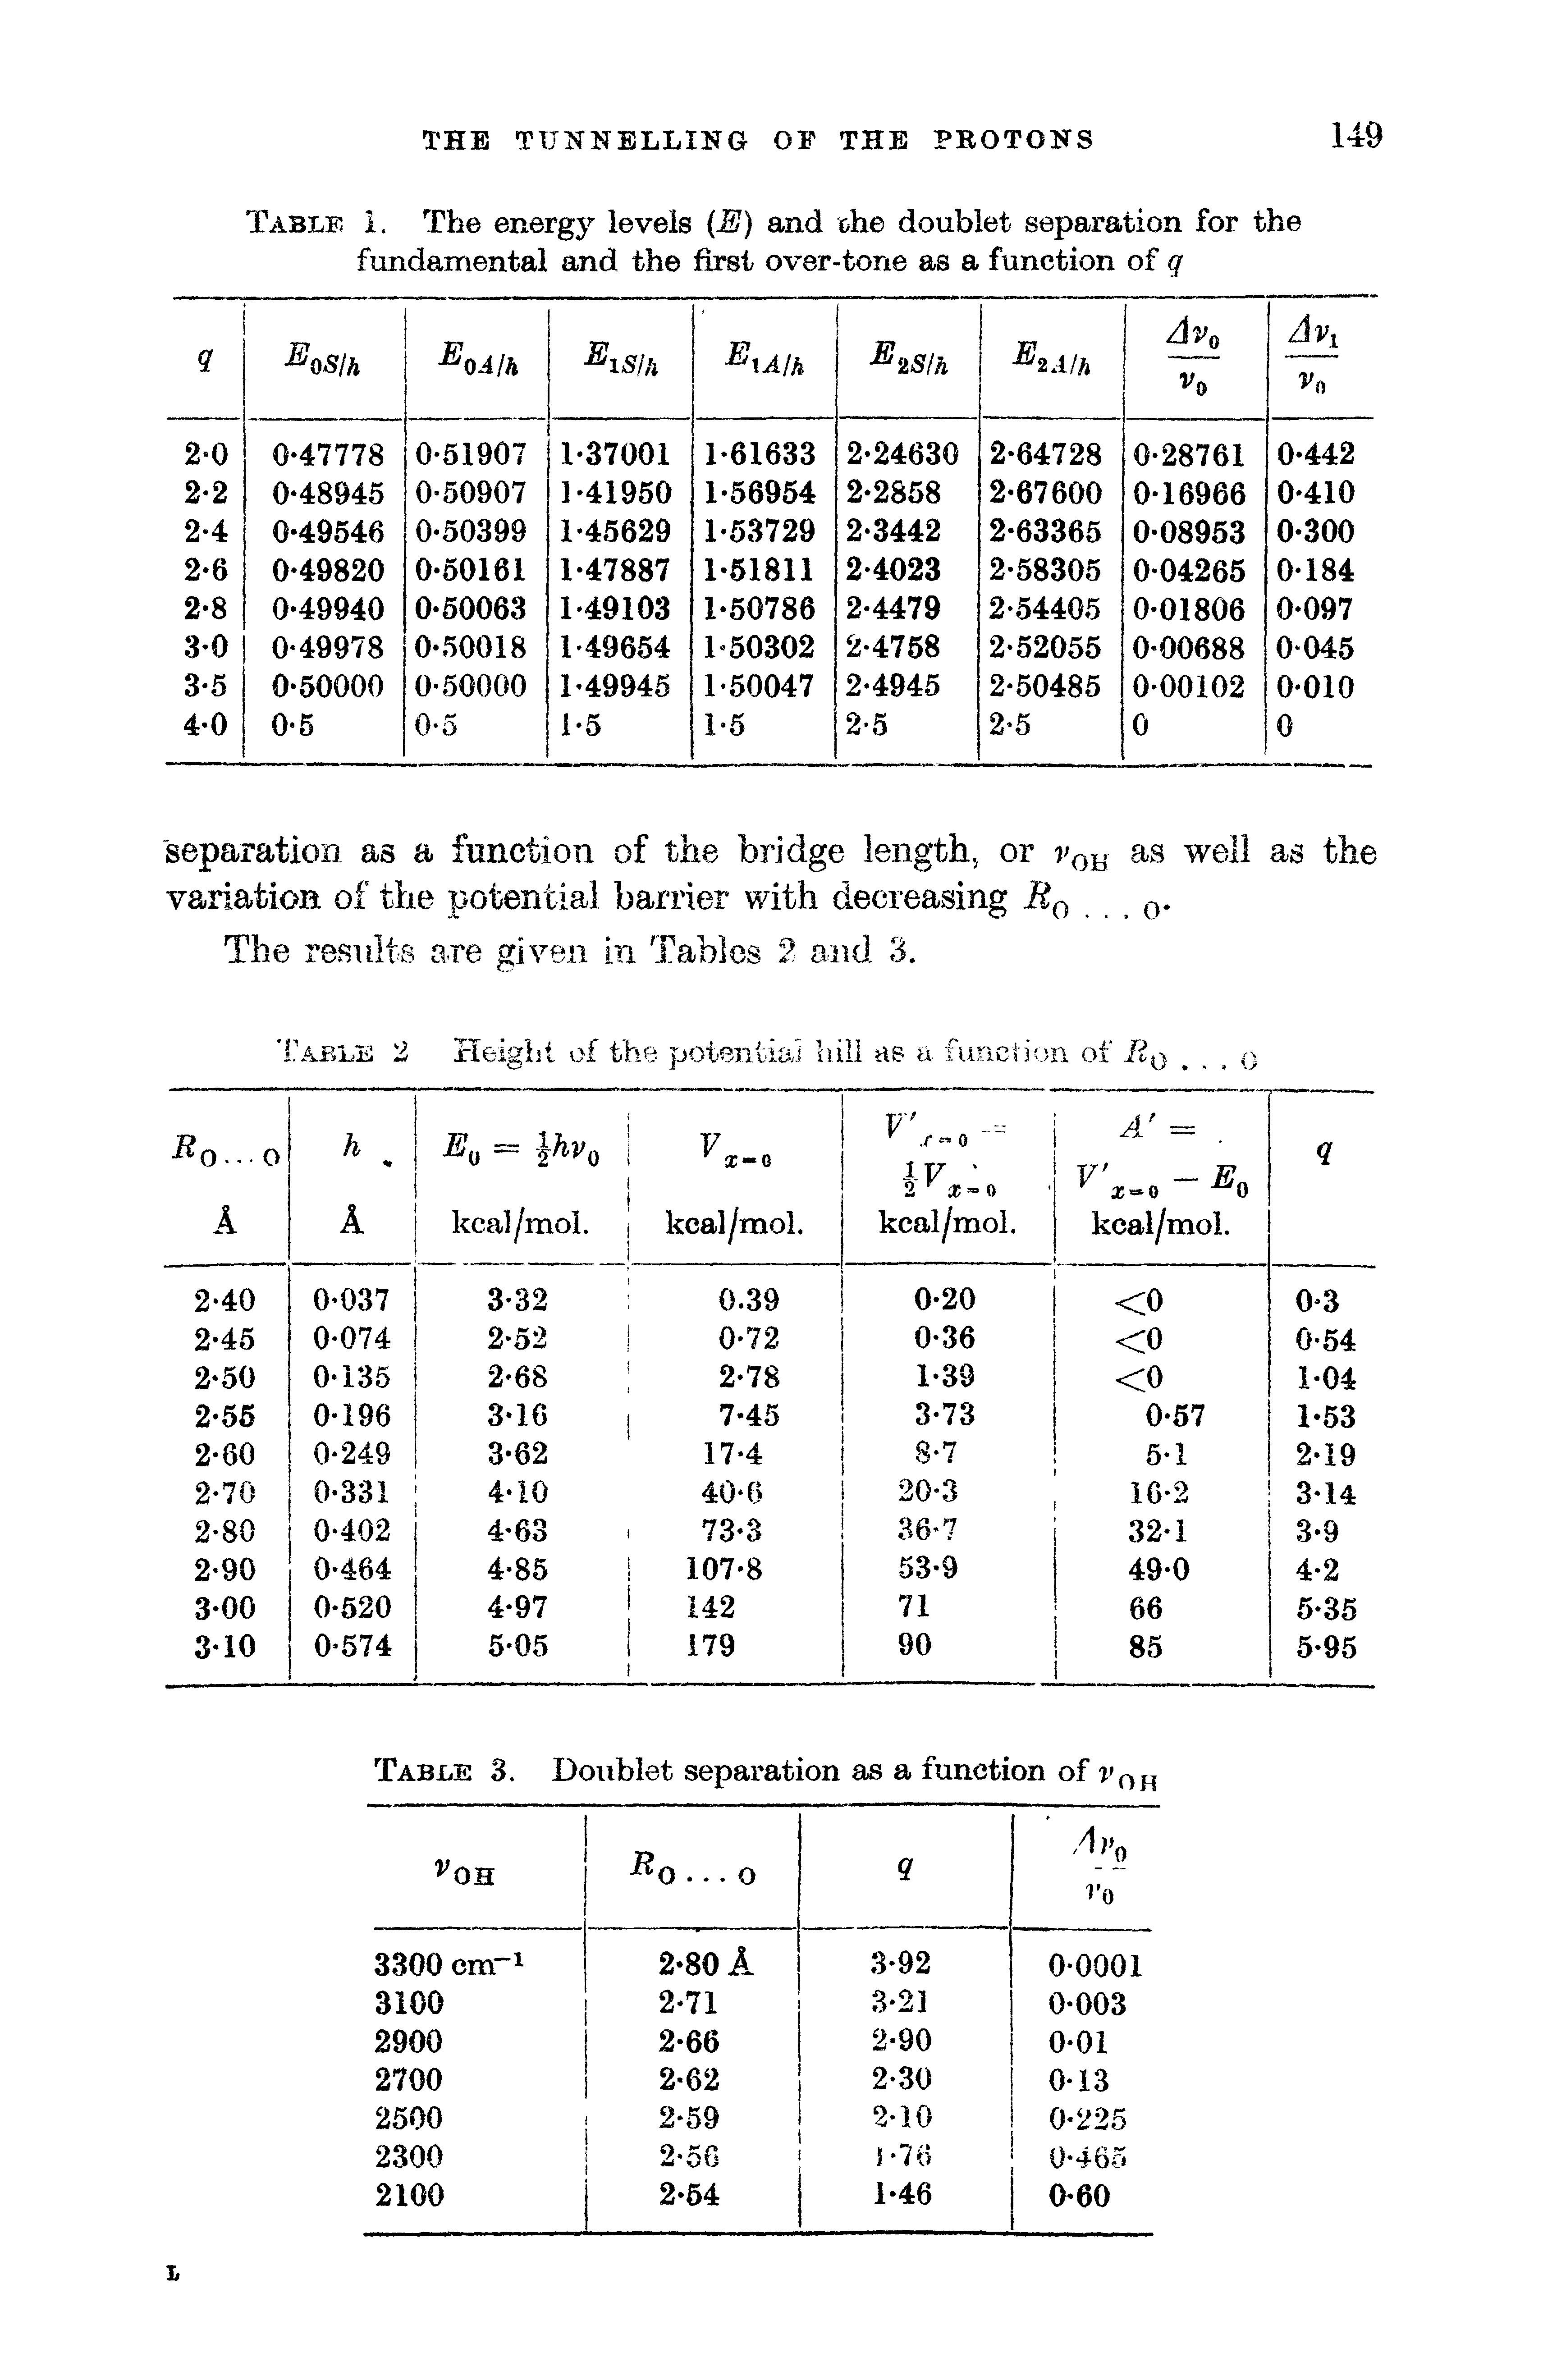 Table I. The energy levels (E) and the doublet separation for the fundamental and the first over-tone as a function of q...